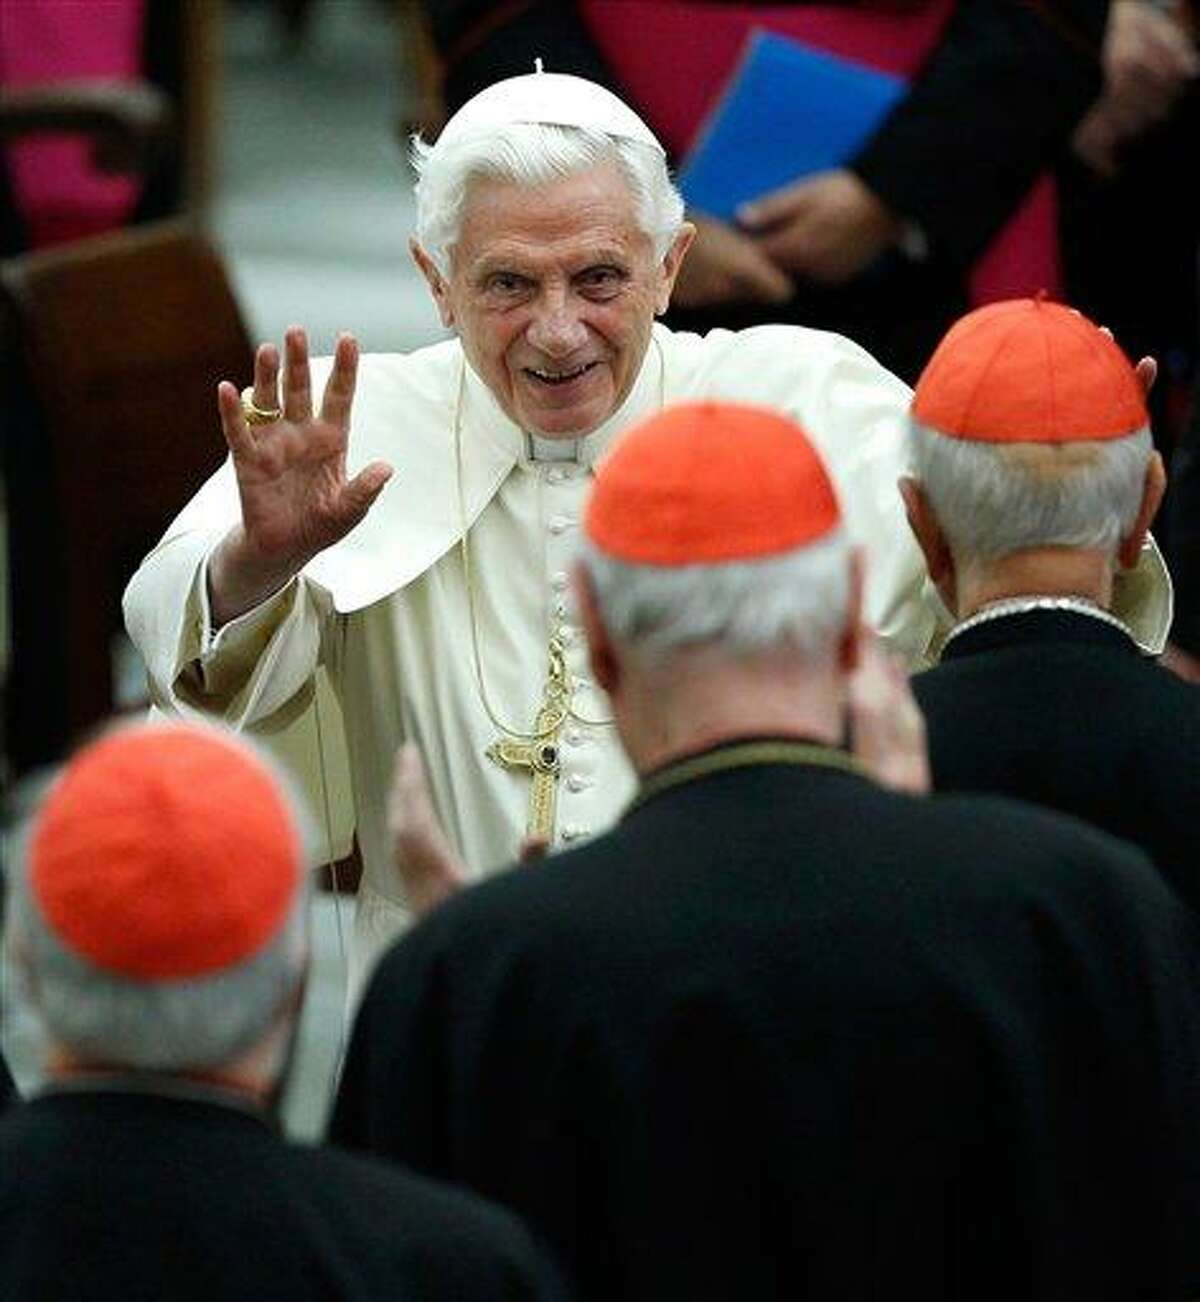 FILE - This Nov. 26, 2011 file photo shows Pope Benedict XVI waving as he leaves Paul VI hall after attending a concert of the Asturias Principality Symphony Orchestra directed by Chilean conductor Maximiano Valdes, at the Vatican. On Monday, Feb. 11, 2013 the Vatican announced that Pope Benedict XVI will resign on Feb. 28, 2013. AP Photo/ Isabella Bonotto